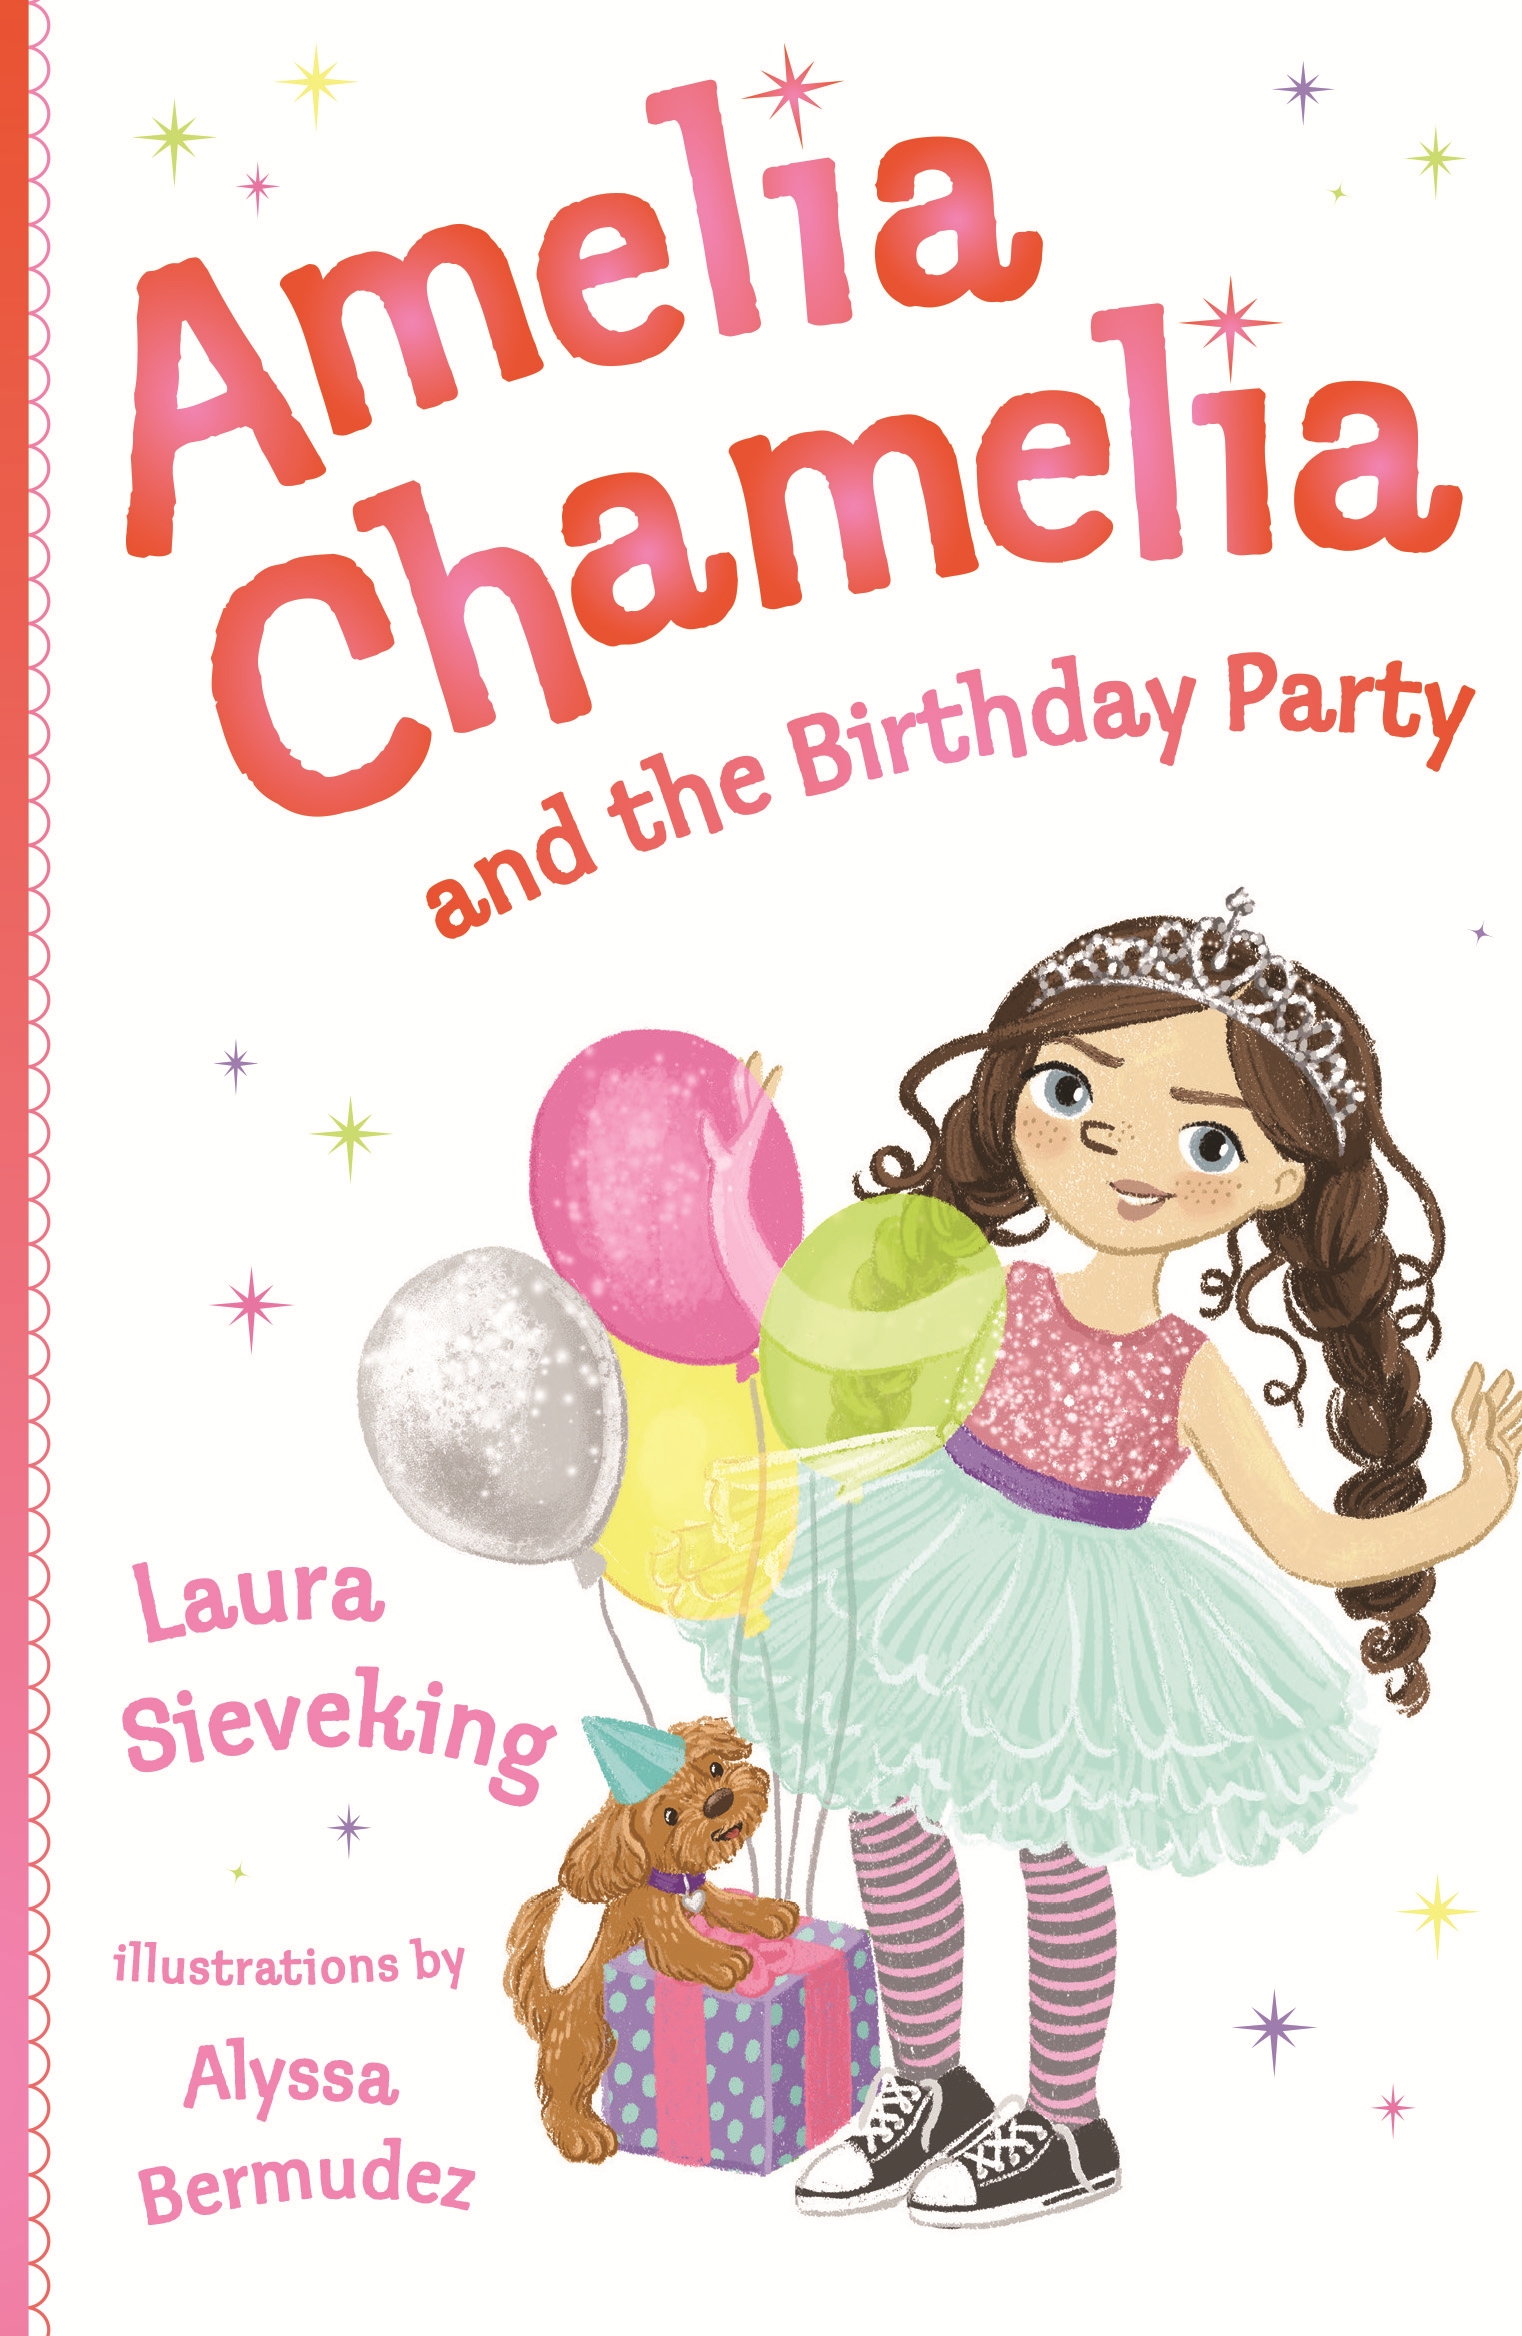 Amelia Chamelia And The Birthday Party By Laura Sieveking